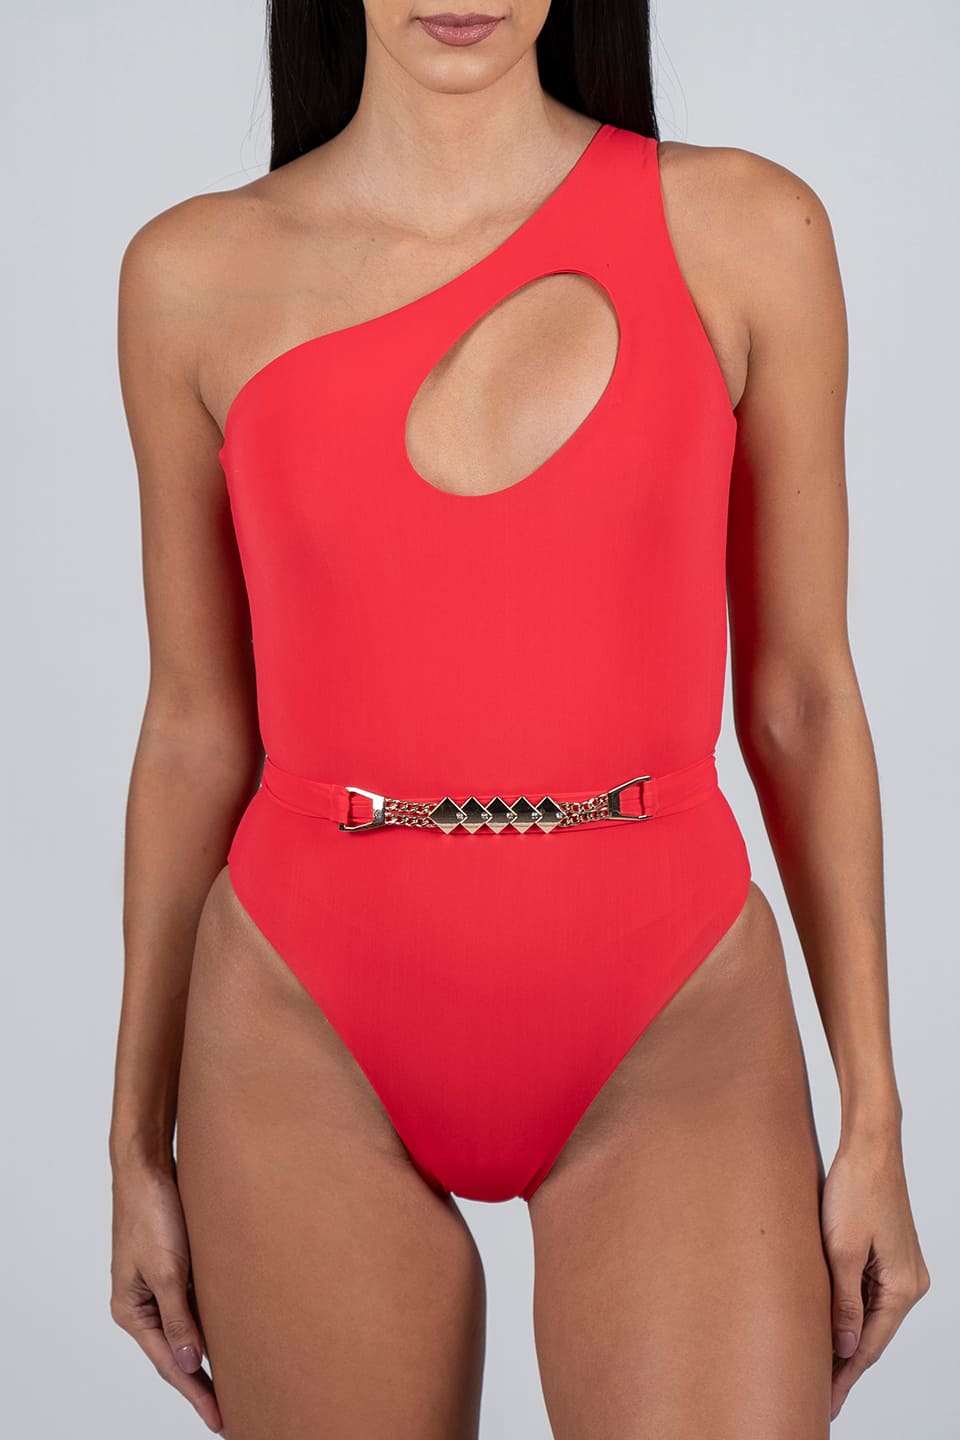 Shop online trendy Red Swimsuits from Lavishly Appointed Fashion designer. Product gallery 1